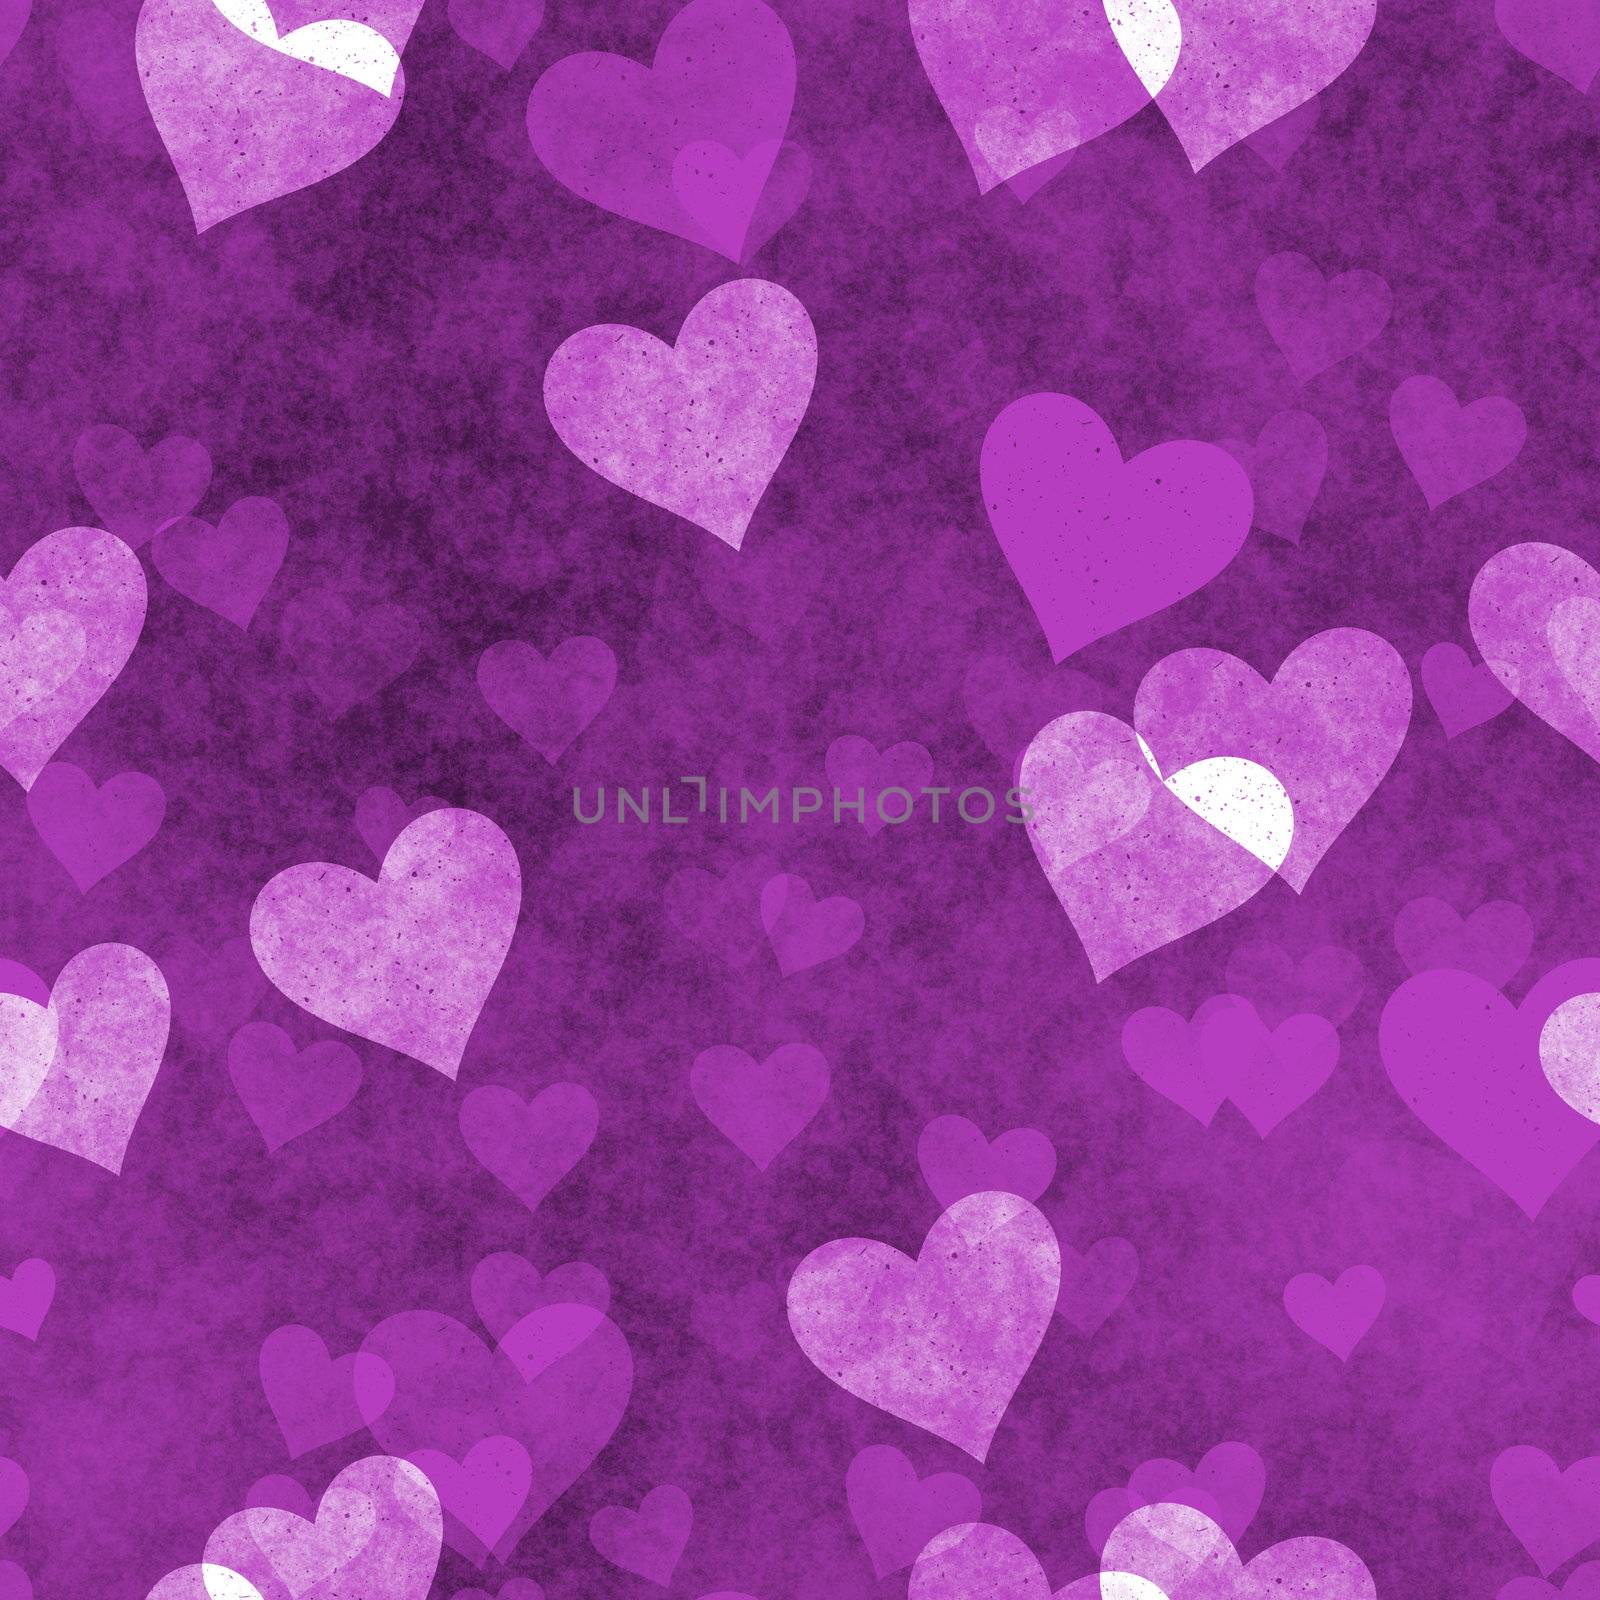 Seamless Hearts Background in Grunge Love Texture